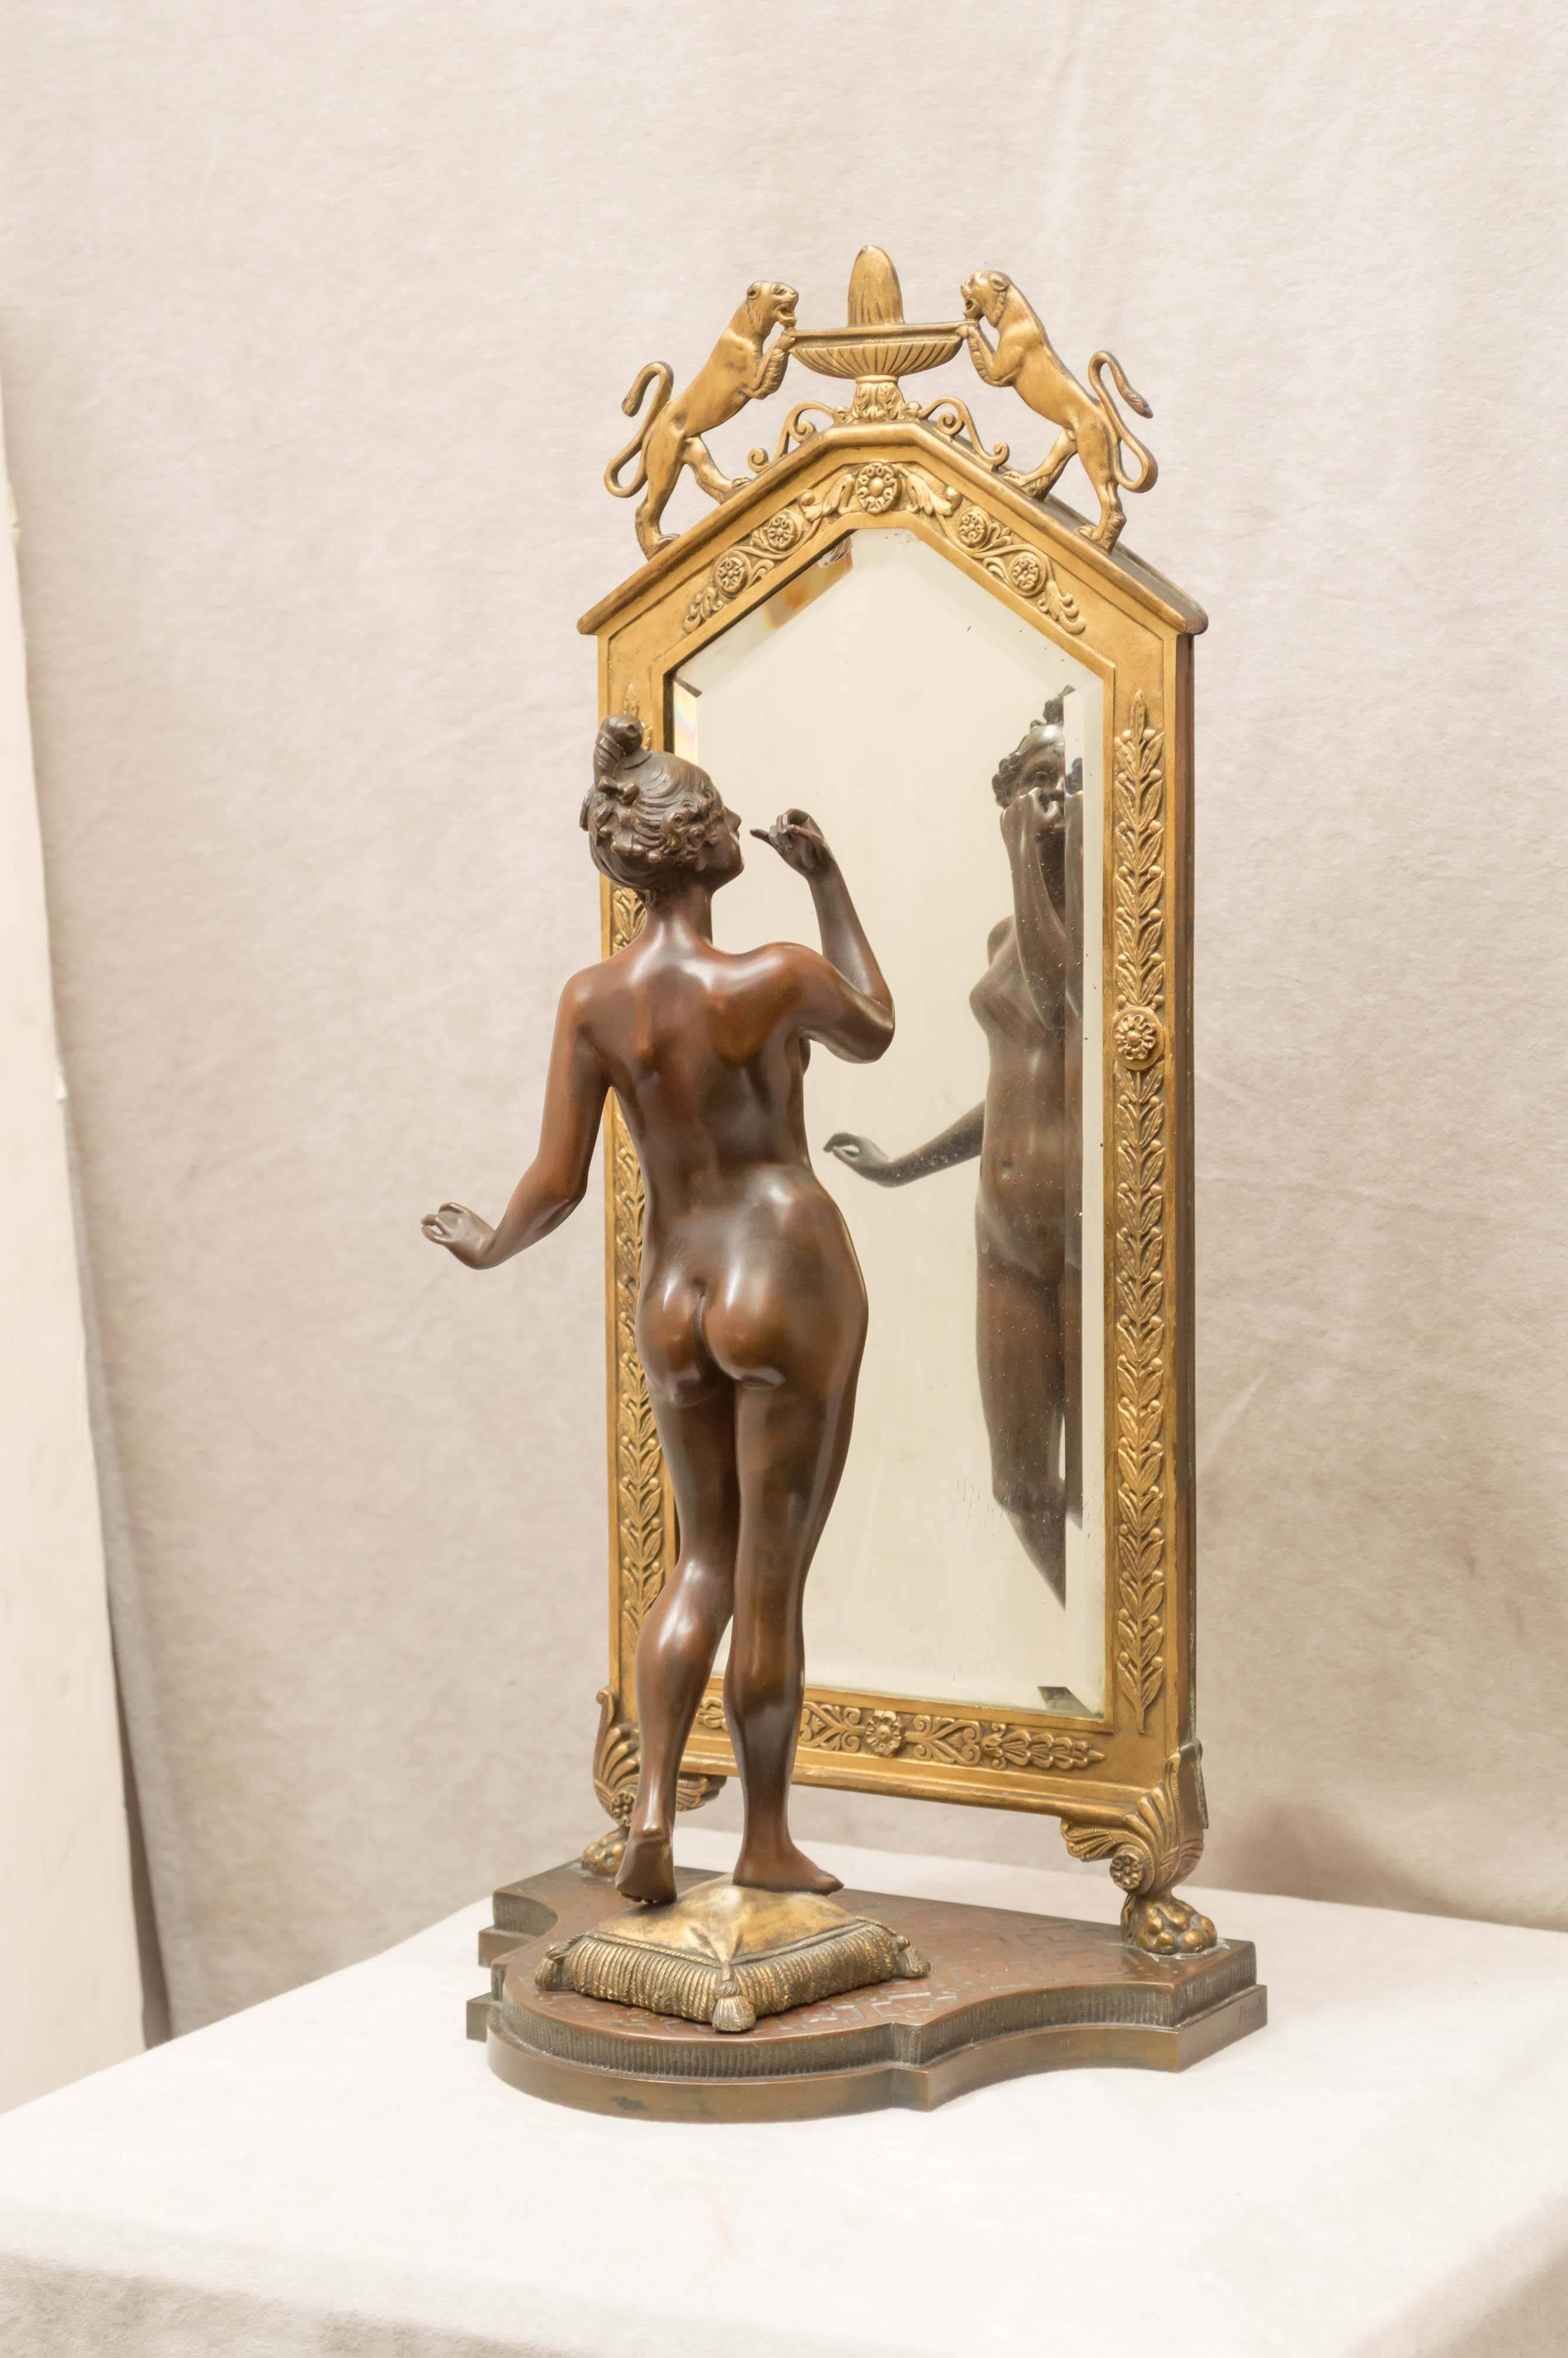 This is a very rare version of a smaller bronze that has the same girl looking in a standing mirror as well. We have owned the smaller version several times. For an example of the smaller version, please check 